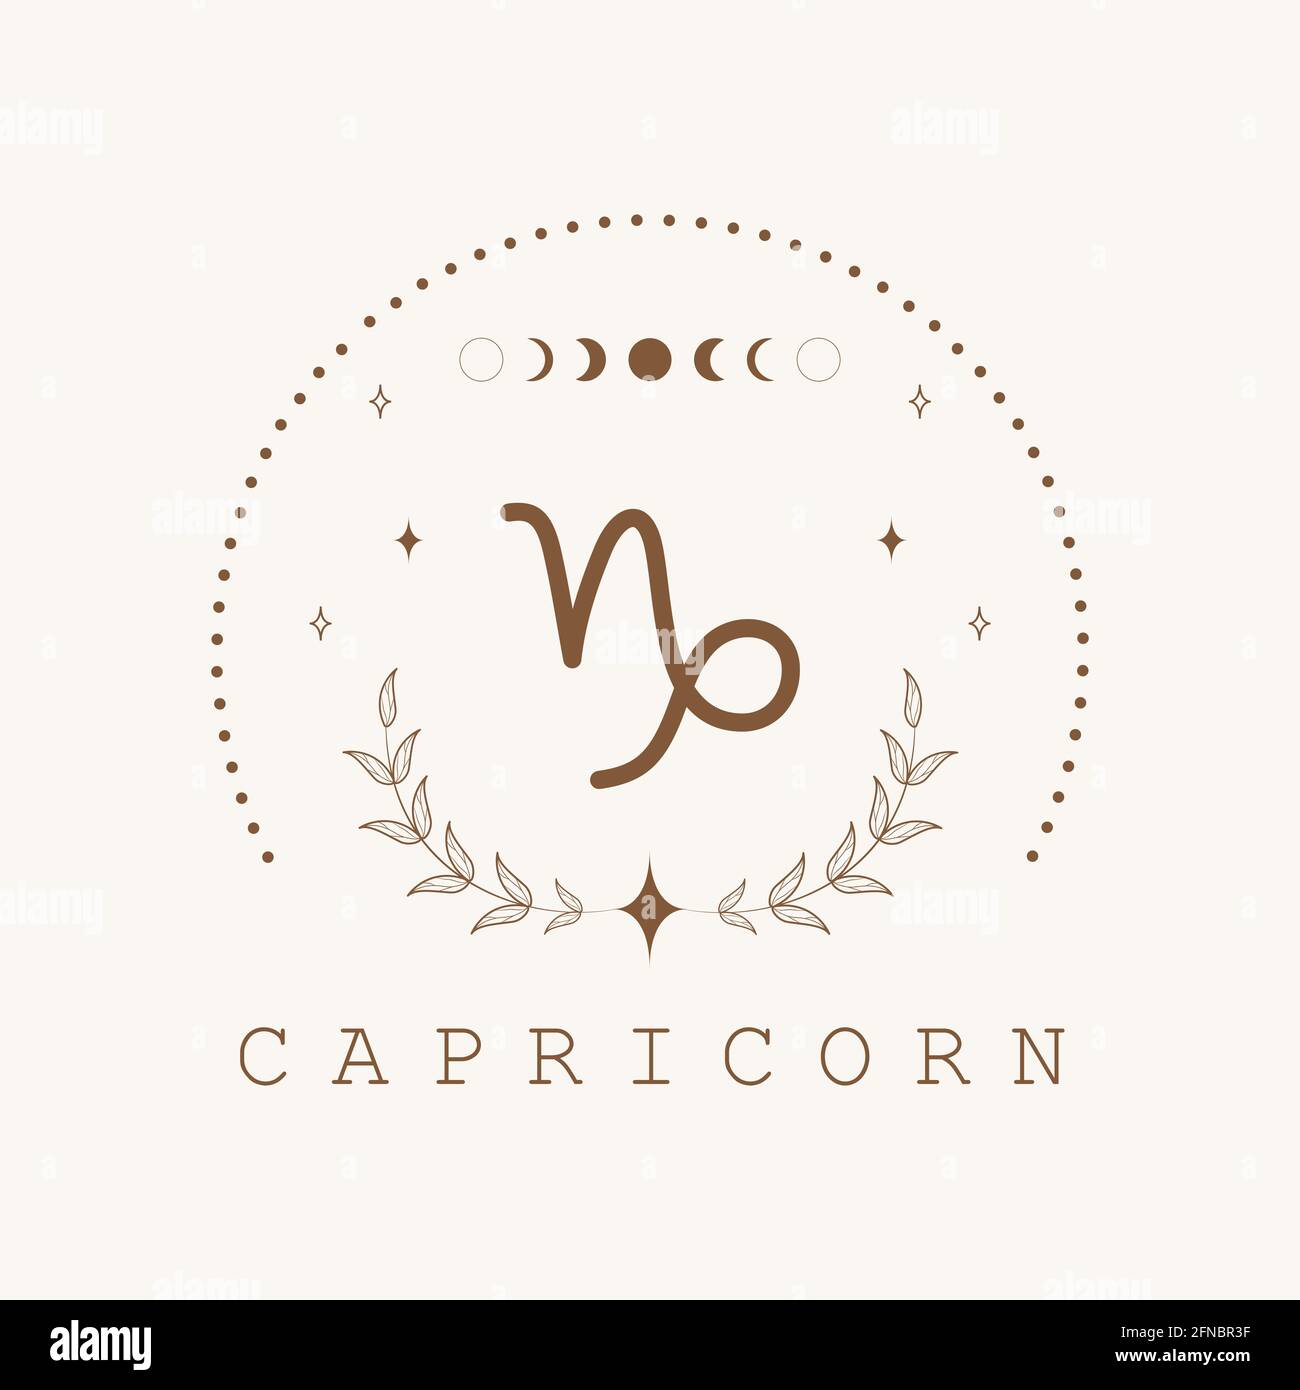 Detail Pictures Of Capricorn Signs Nomer 45